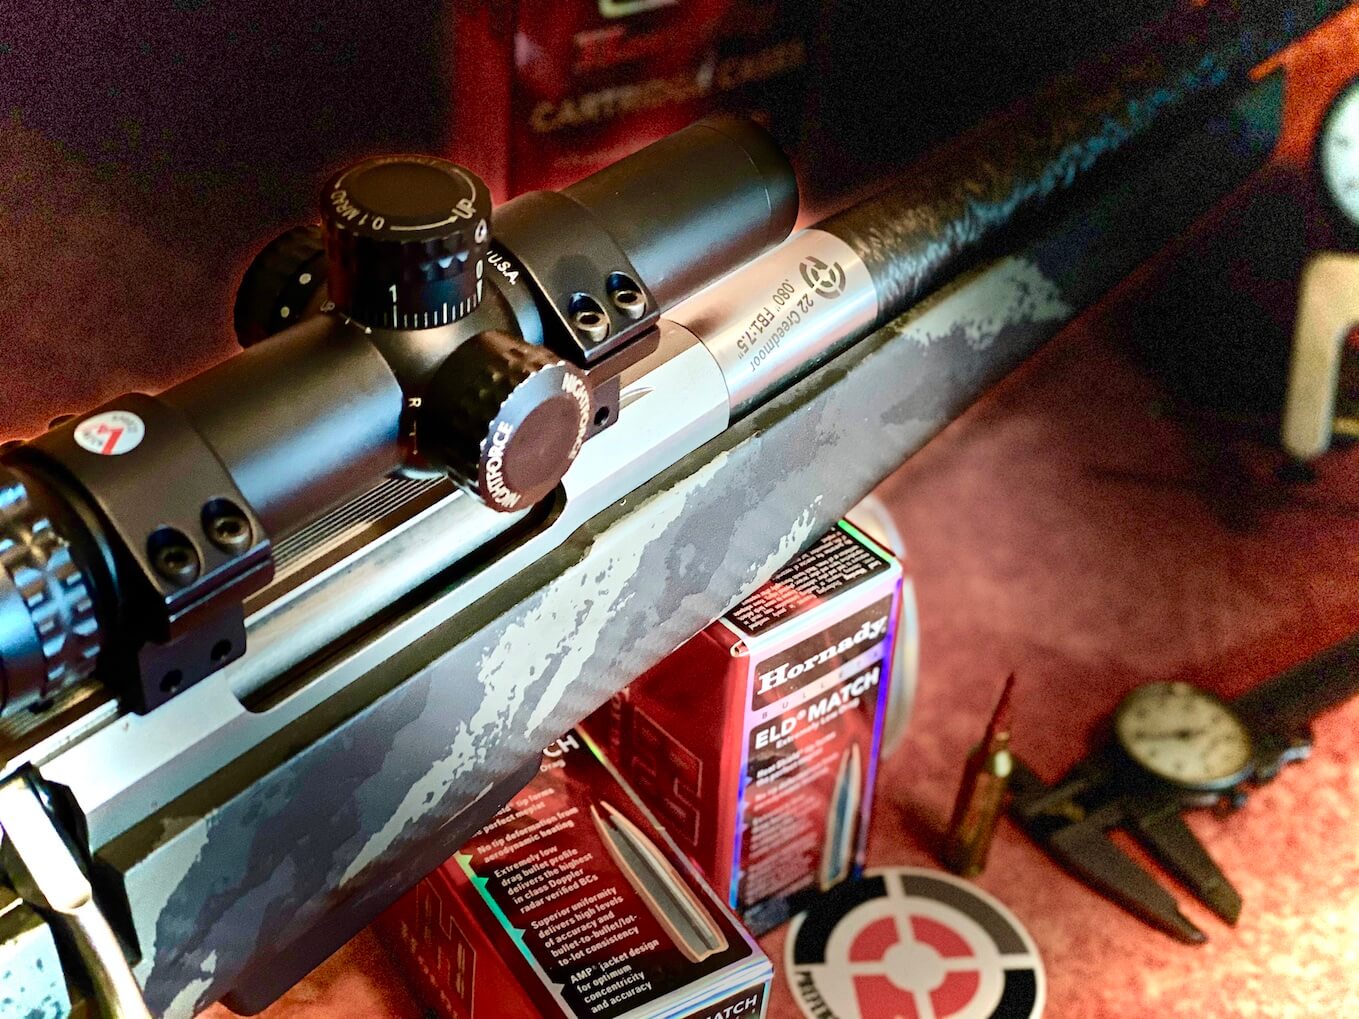 Easily Install Your Own Barrels in Custom Calibers with Preferred Barrel Blank’s Pre-Fit Barrel